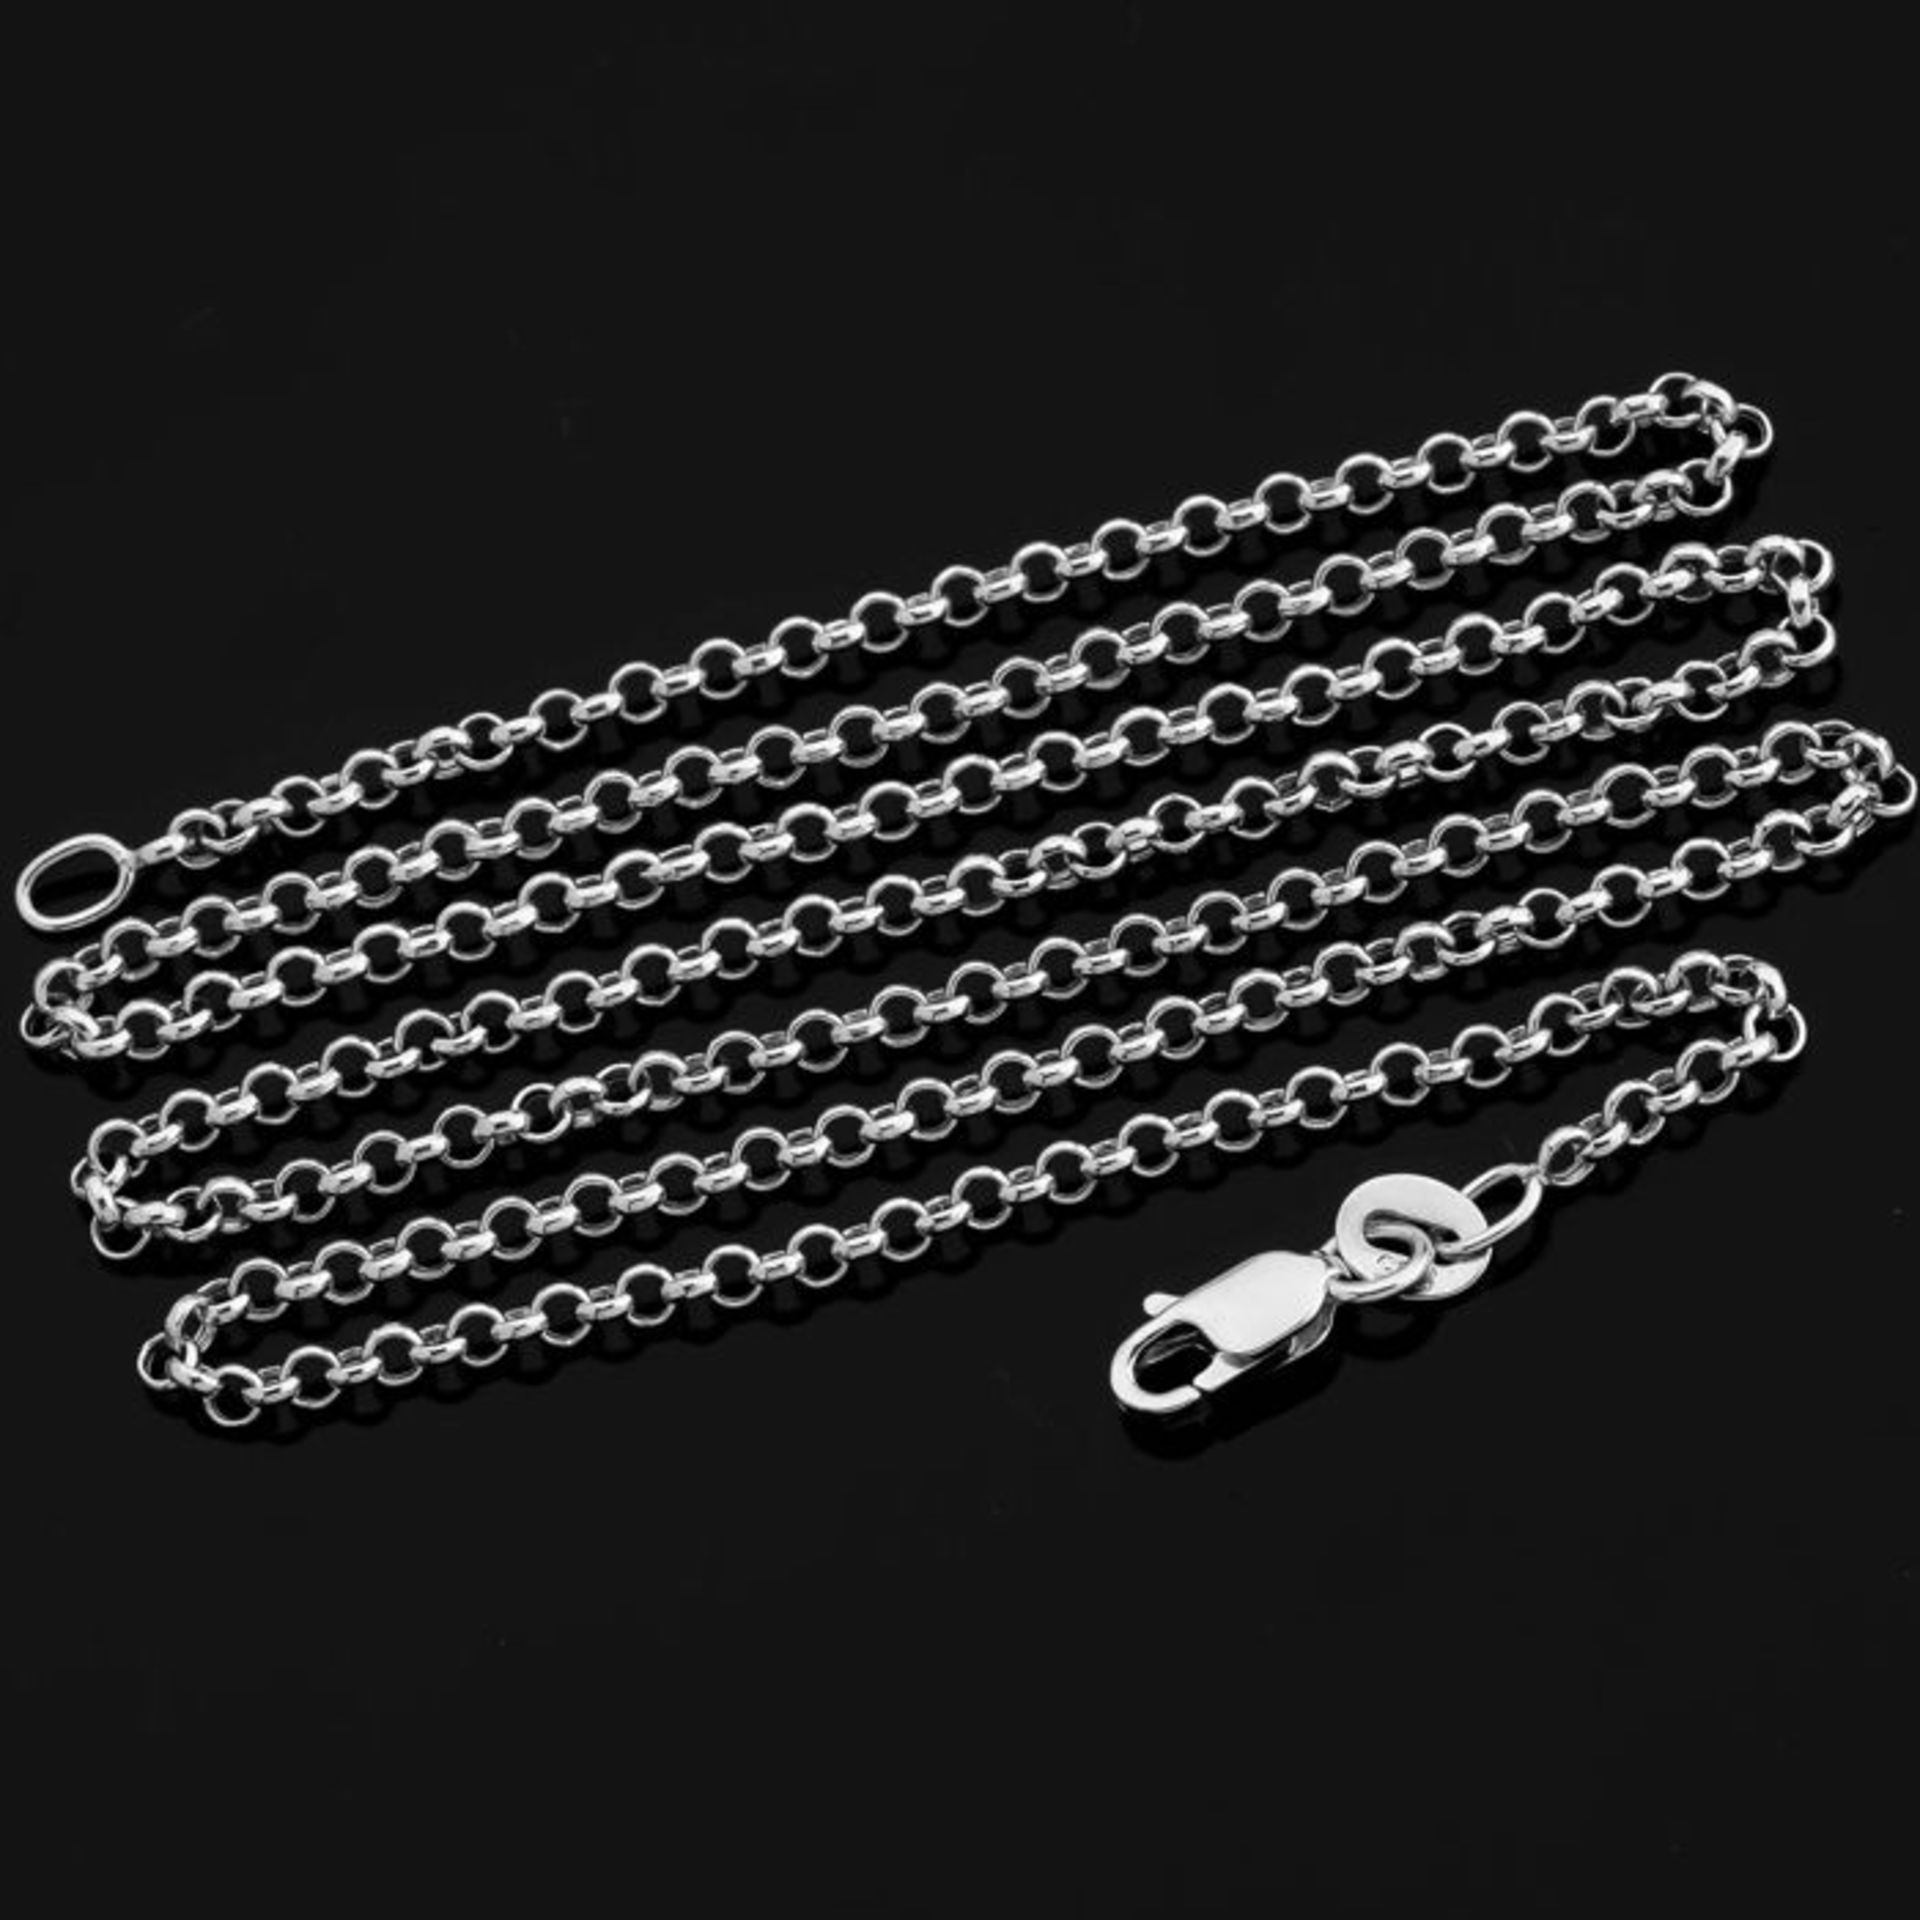 50 cm (19.7 in) Rolo Chain Necklace. In 14K White Gold